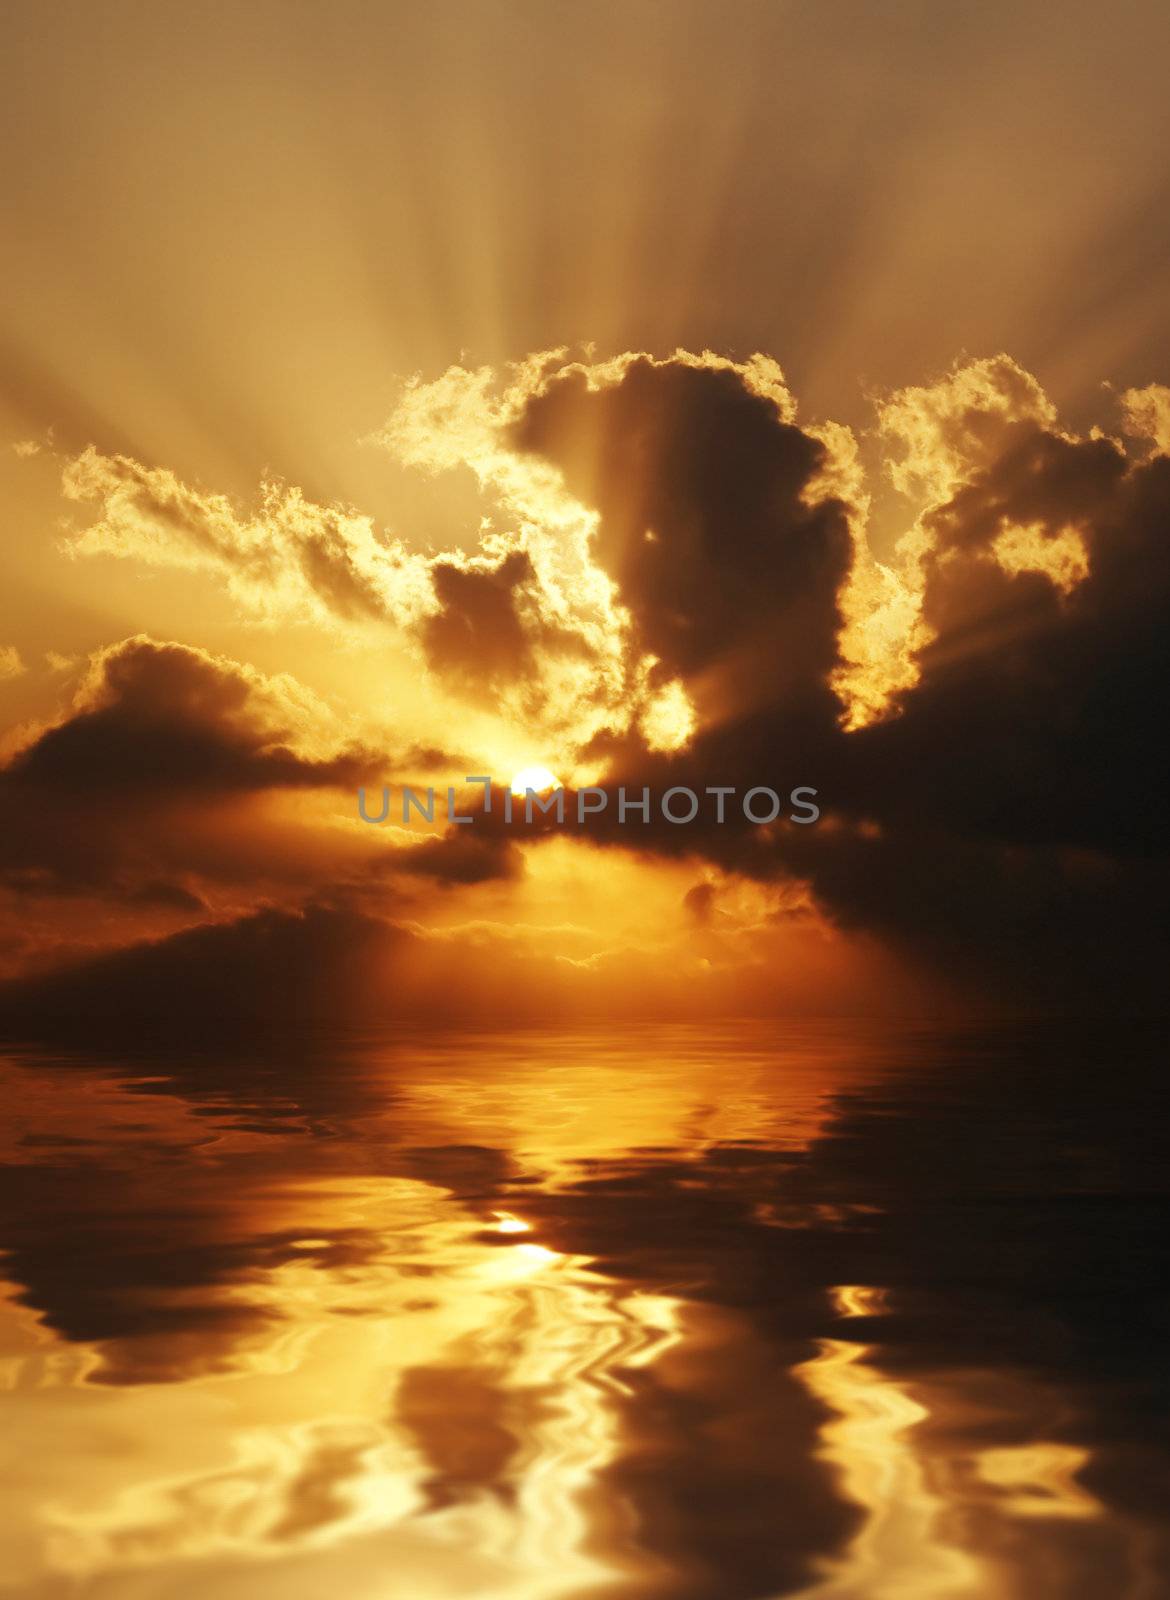 dramatic sundown scene with dark clouds and rays over sea. Good as background, wallpaper.